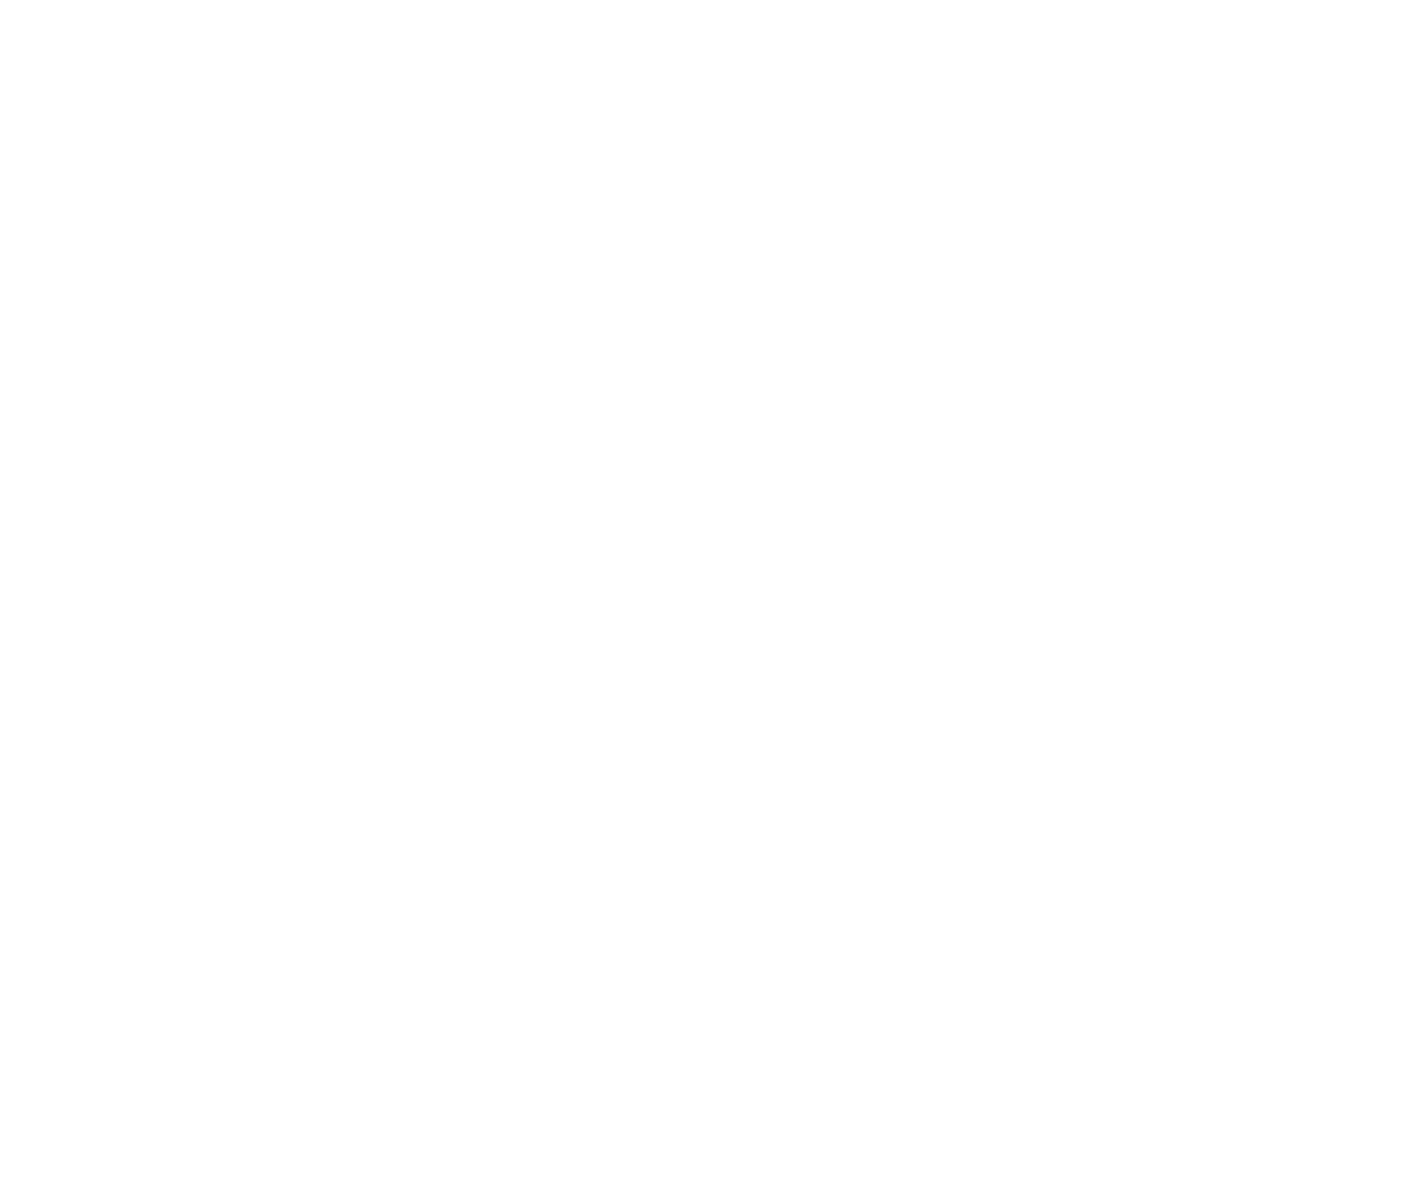 The Week Independent Schools Guide 2019 - Great Country Prep